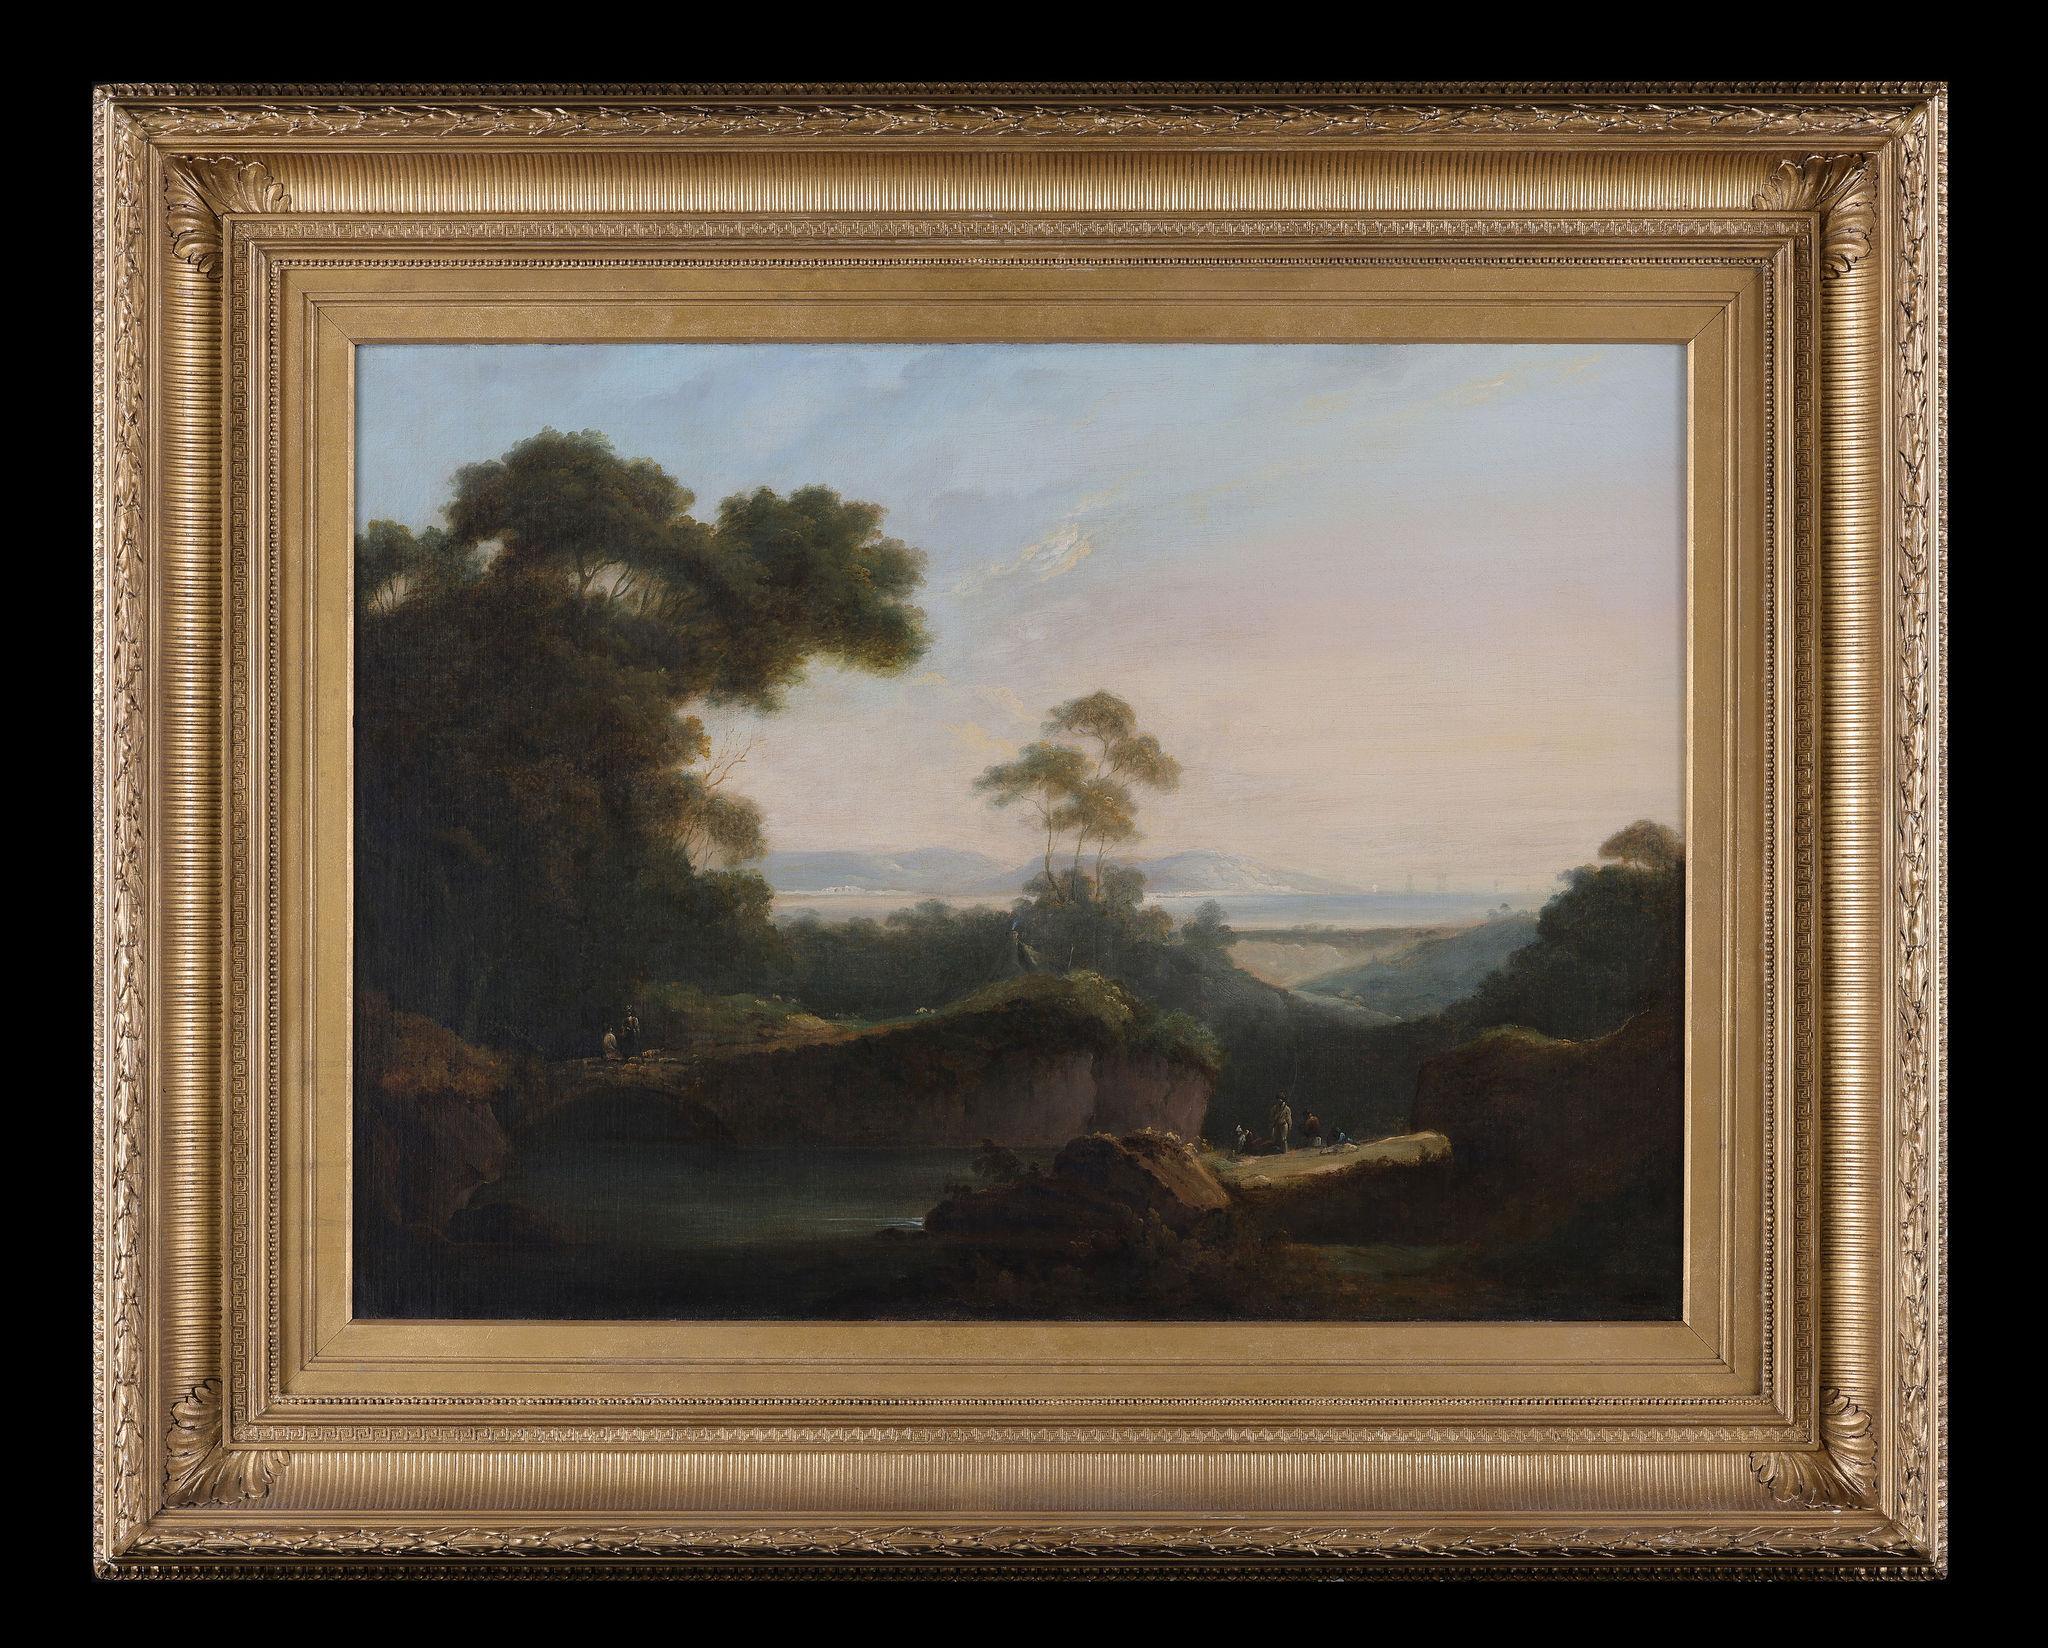 Landscape Painting Richard Wilson R.A. - The Travellers